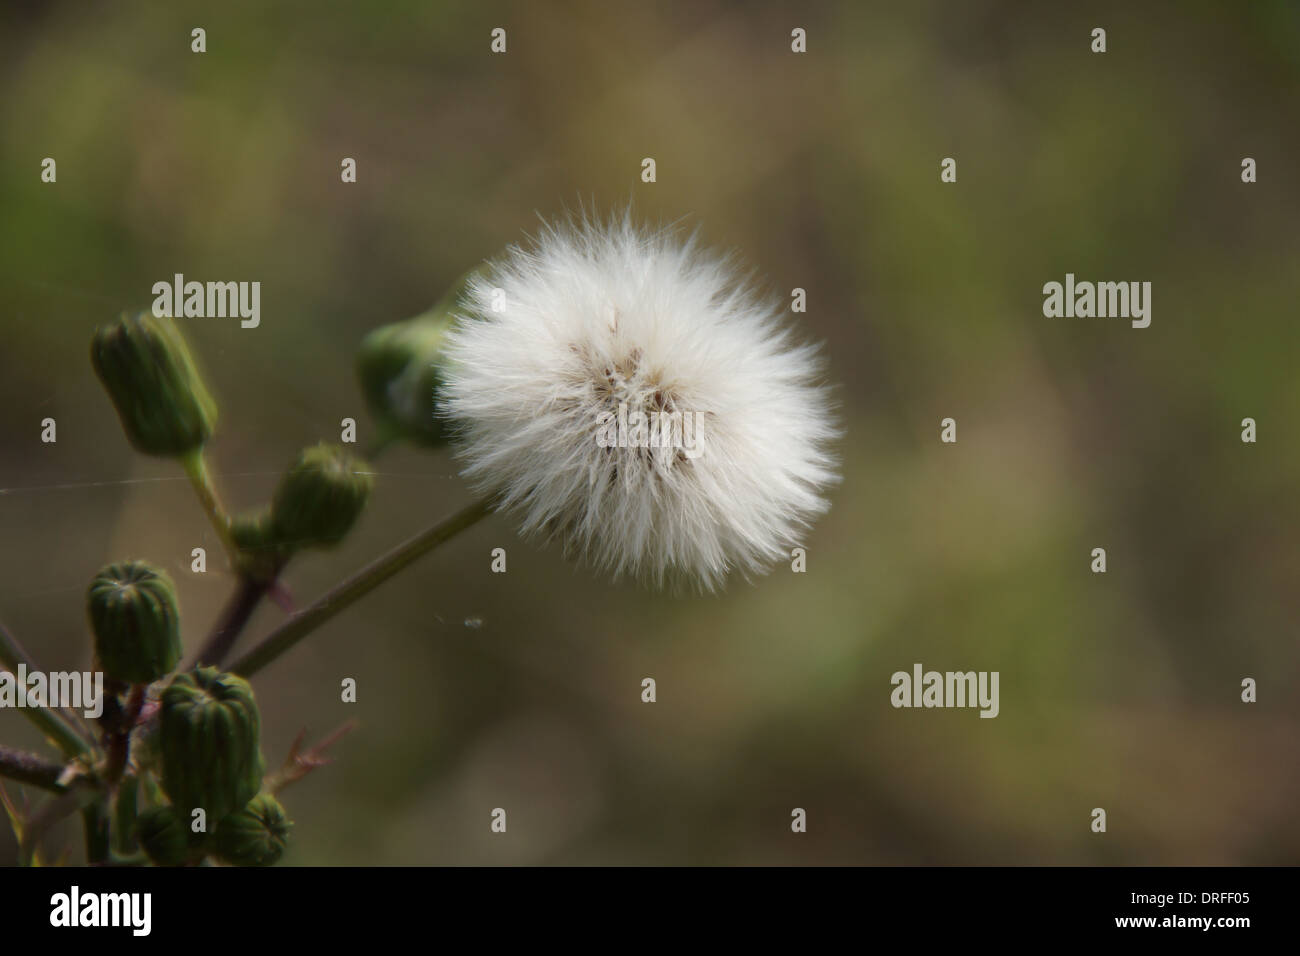 Close up photo of a Dandelion plant gone to seed.  Photo taken in early Autumn. Stock Photo